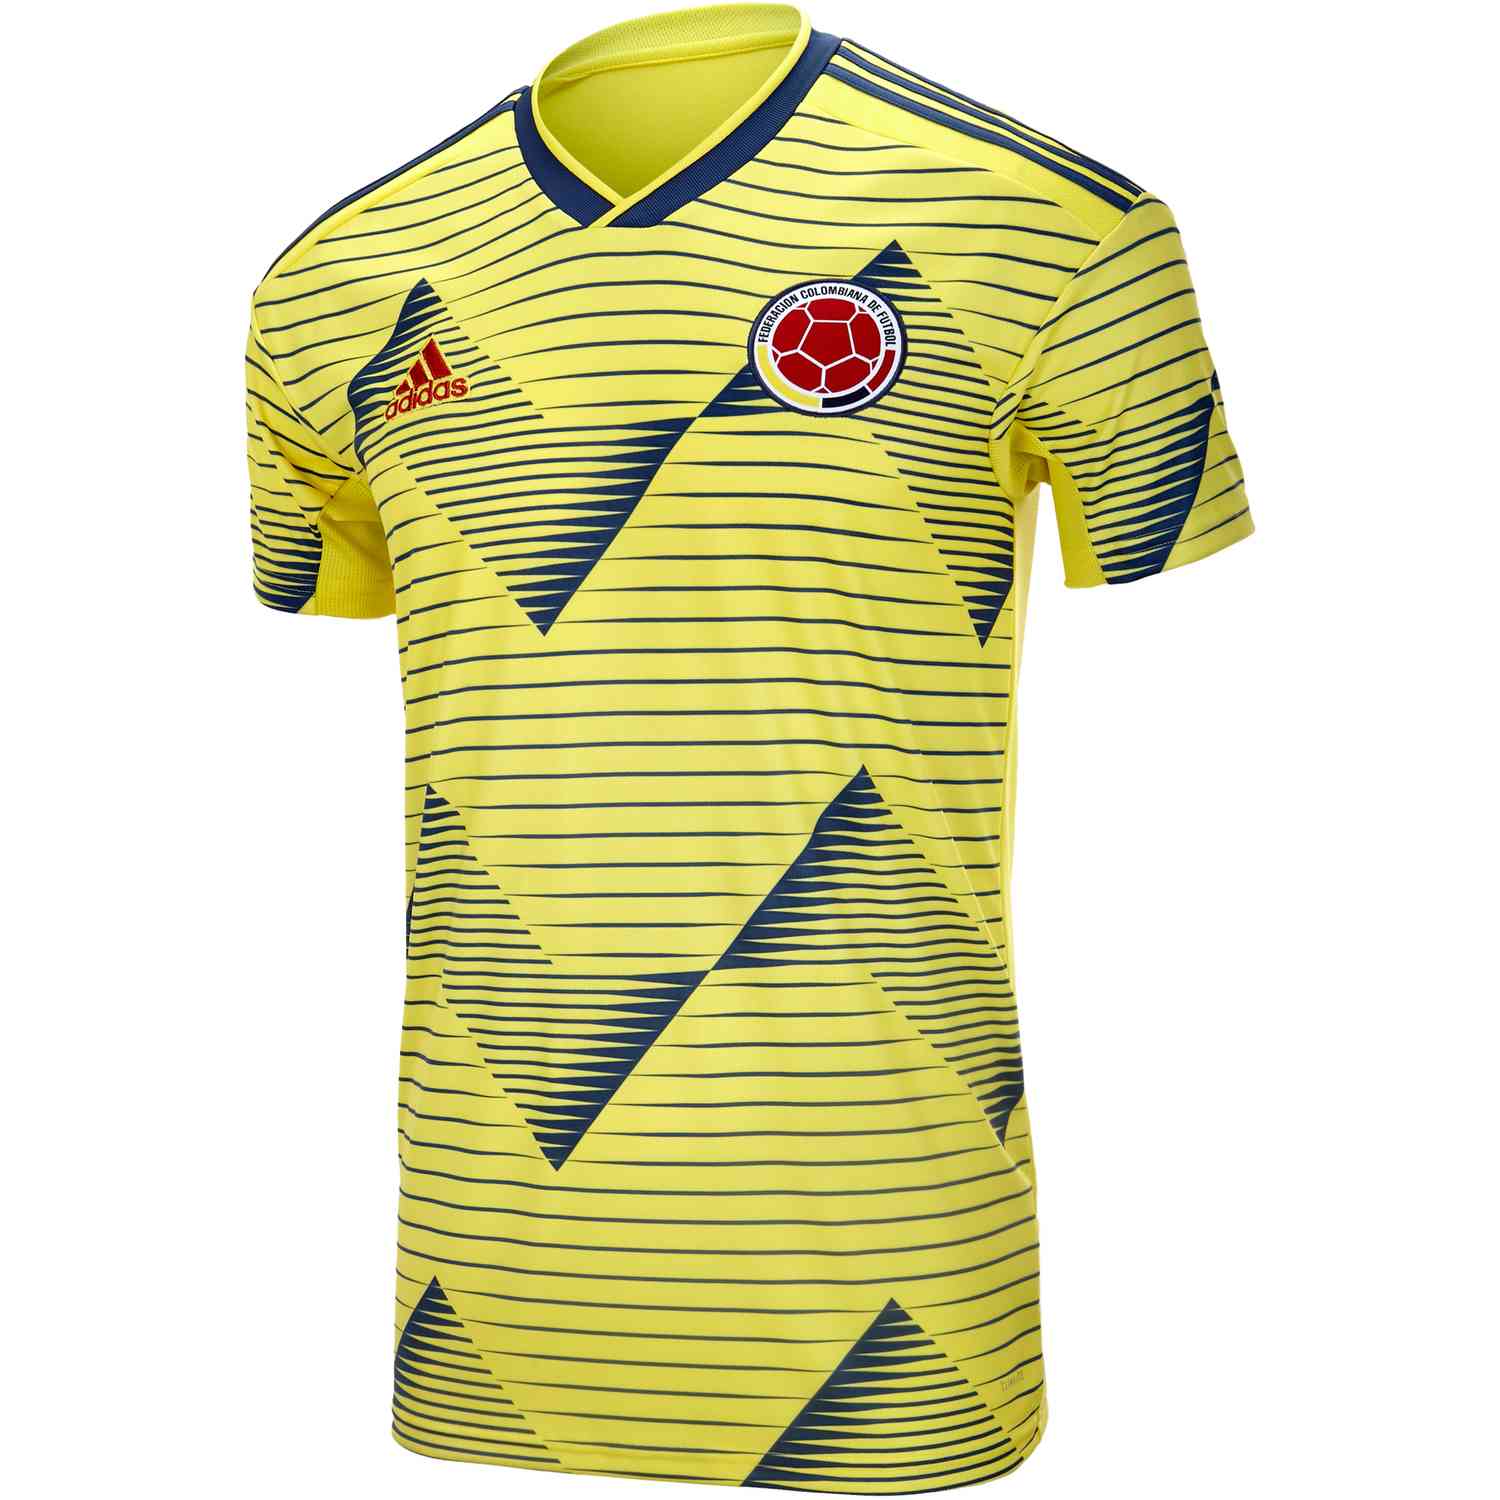 2019 adidas Colombia Home Jersey